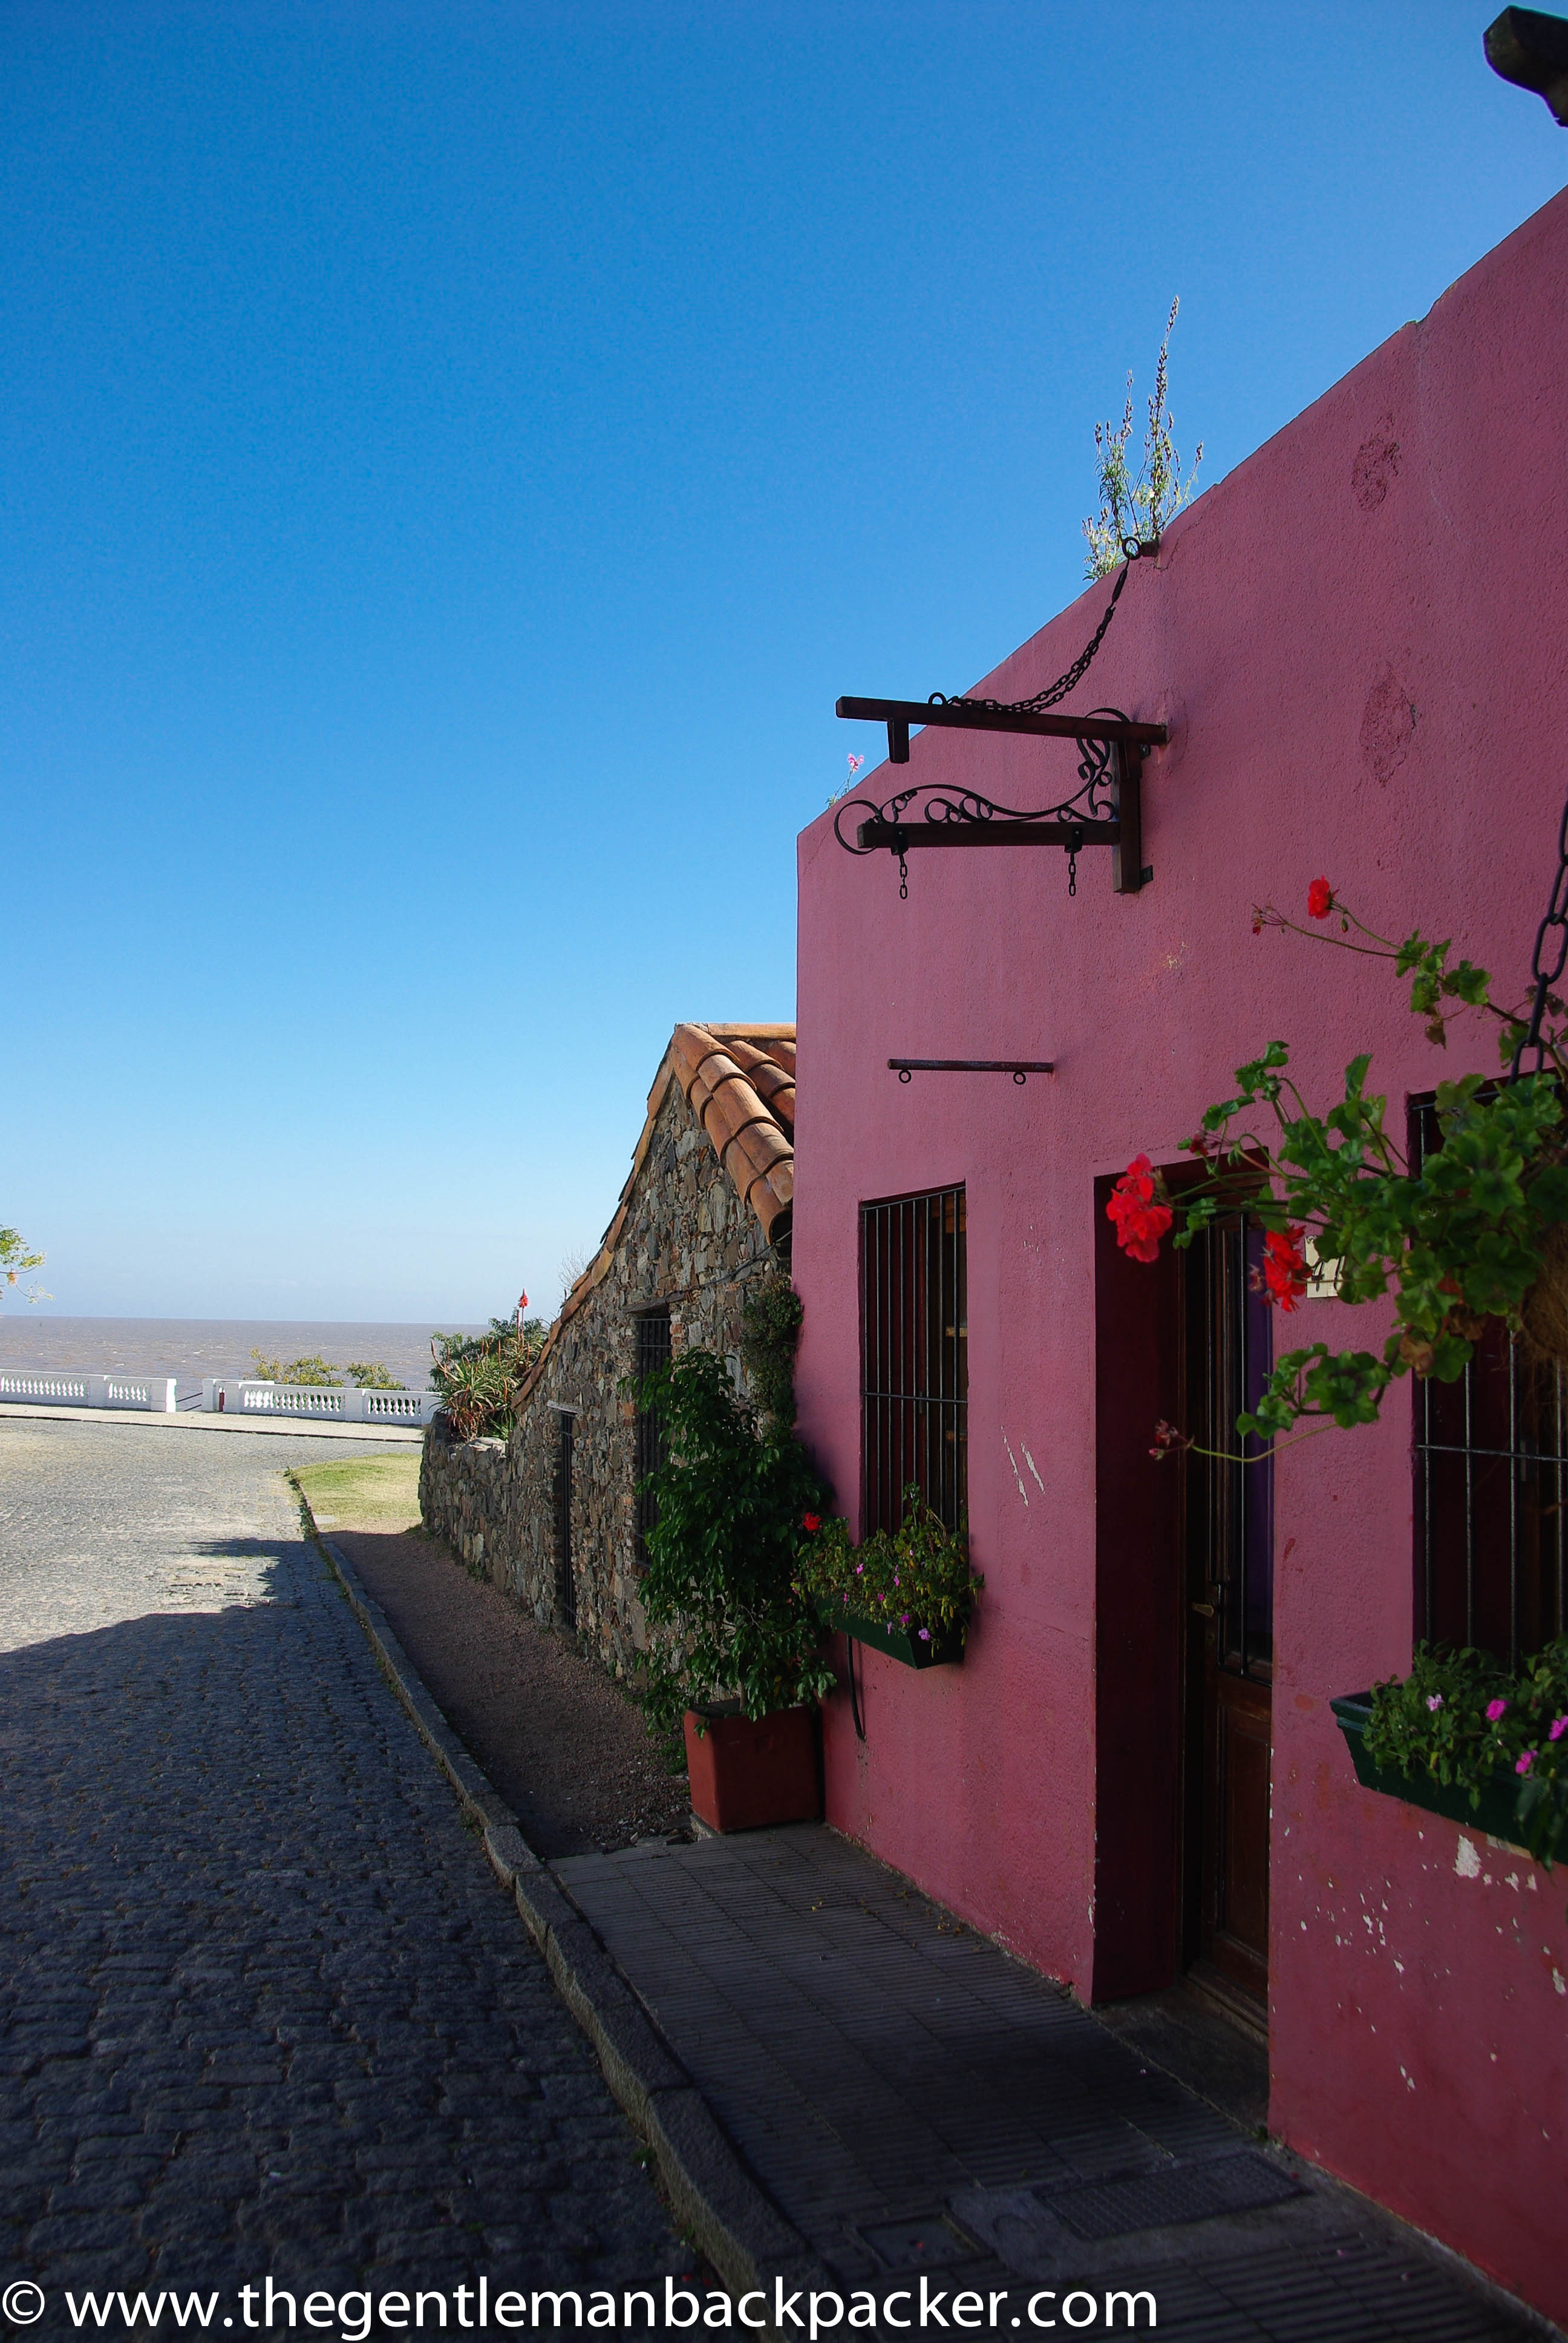 Hop on a ferry from Buenos Aires and visit Colonia, Uruguay for a day